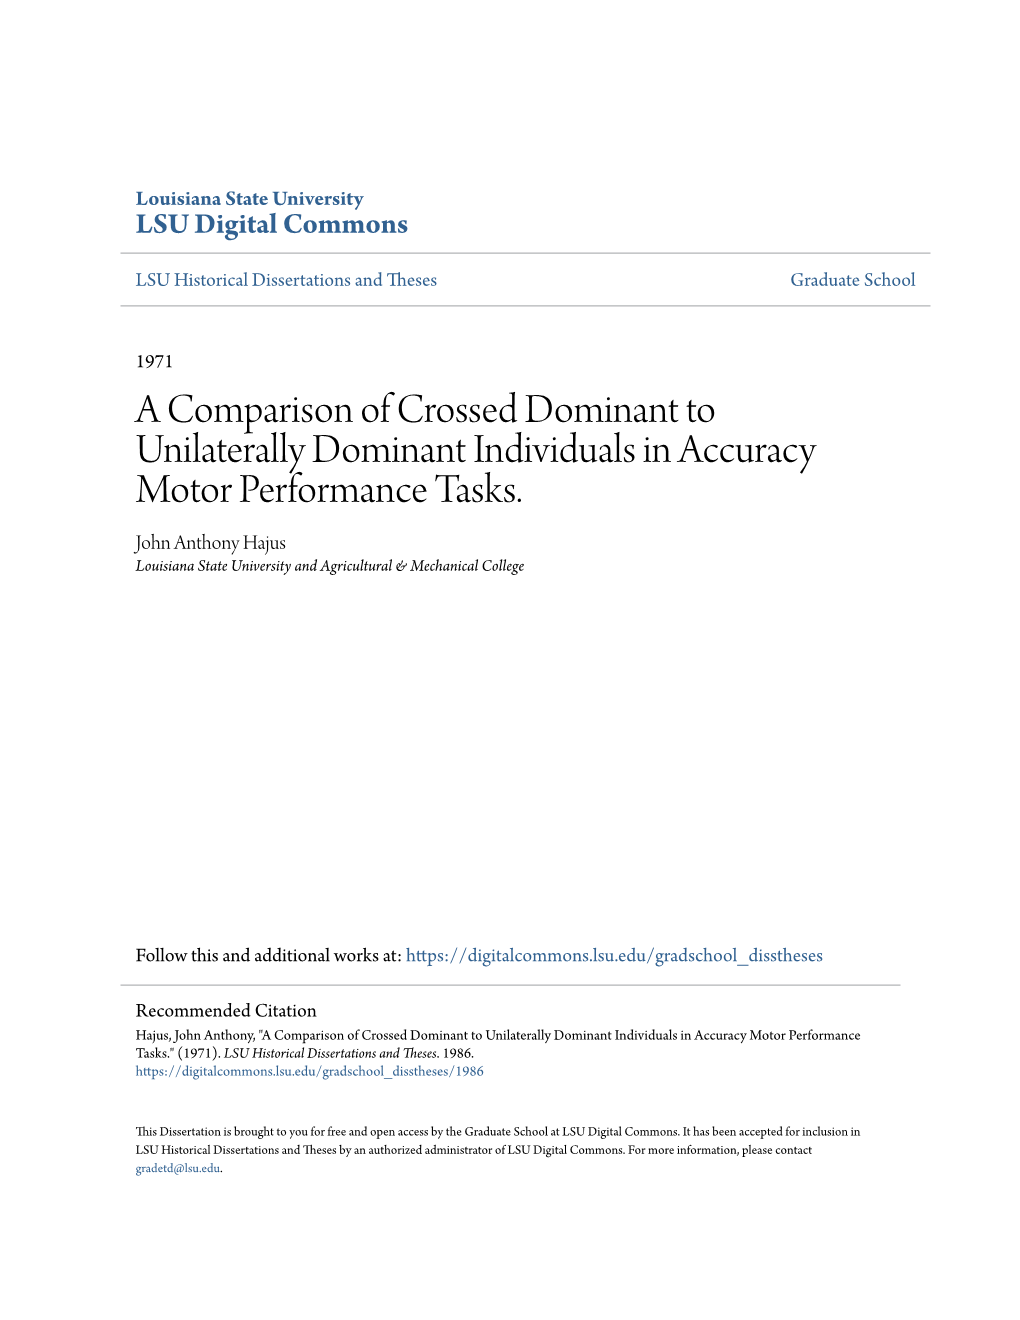 A Comparison of Crossed Dominant to Unilaterally Dominant Individuals in Accuracy Motor Performance Tasks